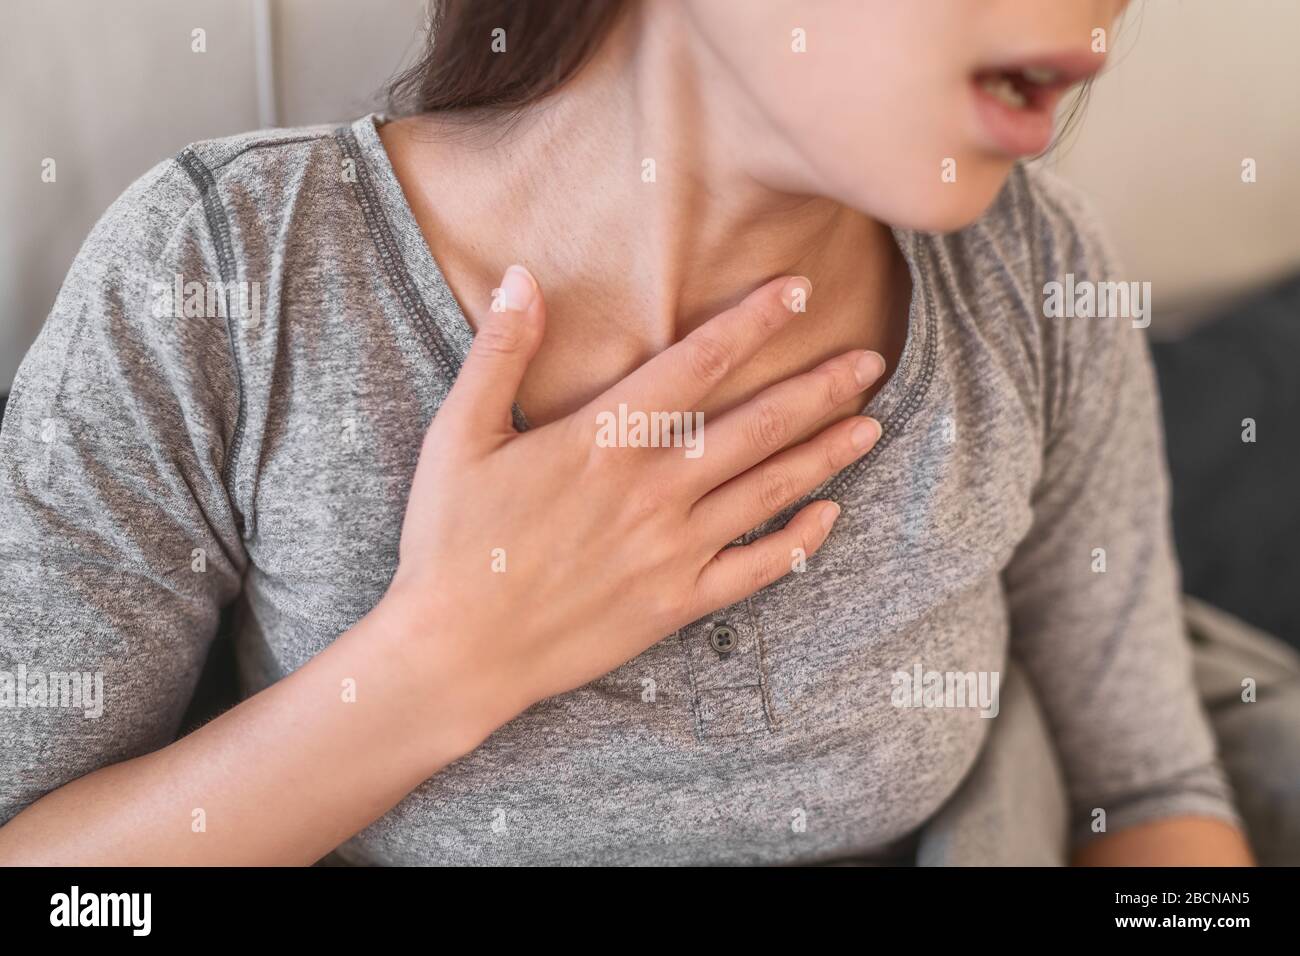 COVID-19 shortness of breath pneumonia woman with Corona virus symptoms such as, fever, body aches breathing difficulties. Stock Photo